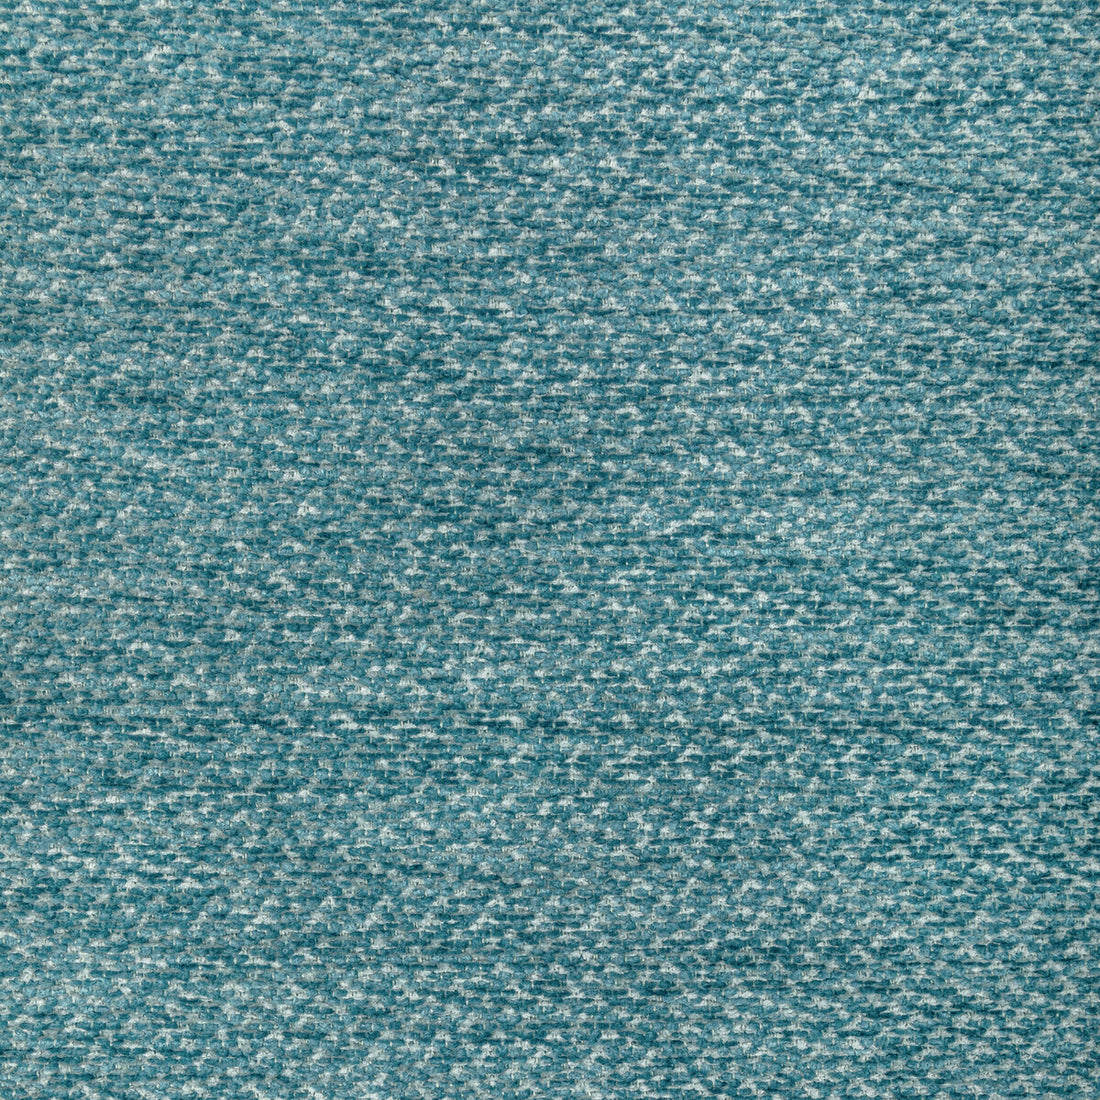 Sasson Texture fabric in teal color - pattern 8022122.13.0 - by Brunschwig &amp; Fils in the Chambery Textures III collection